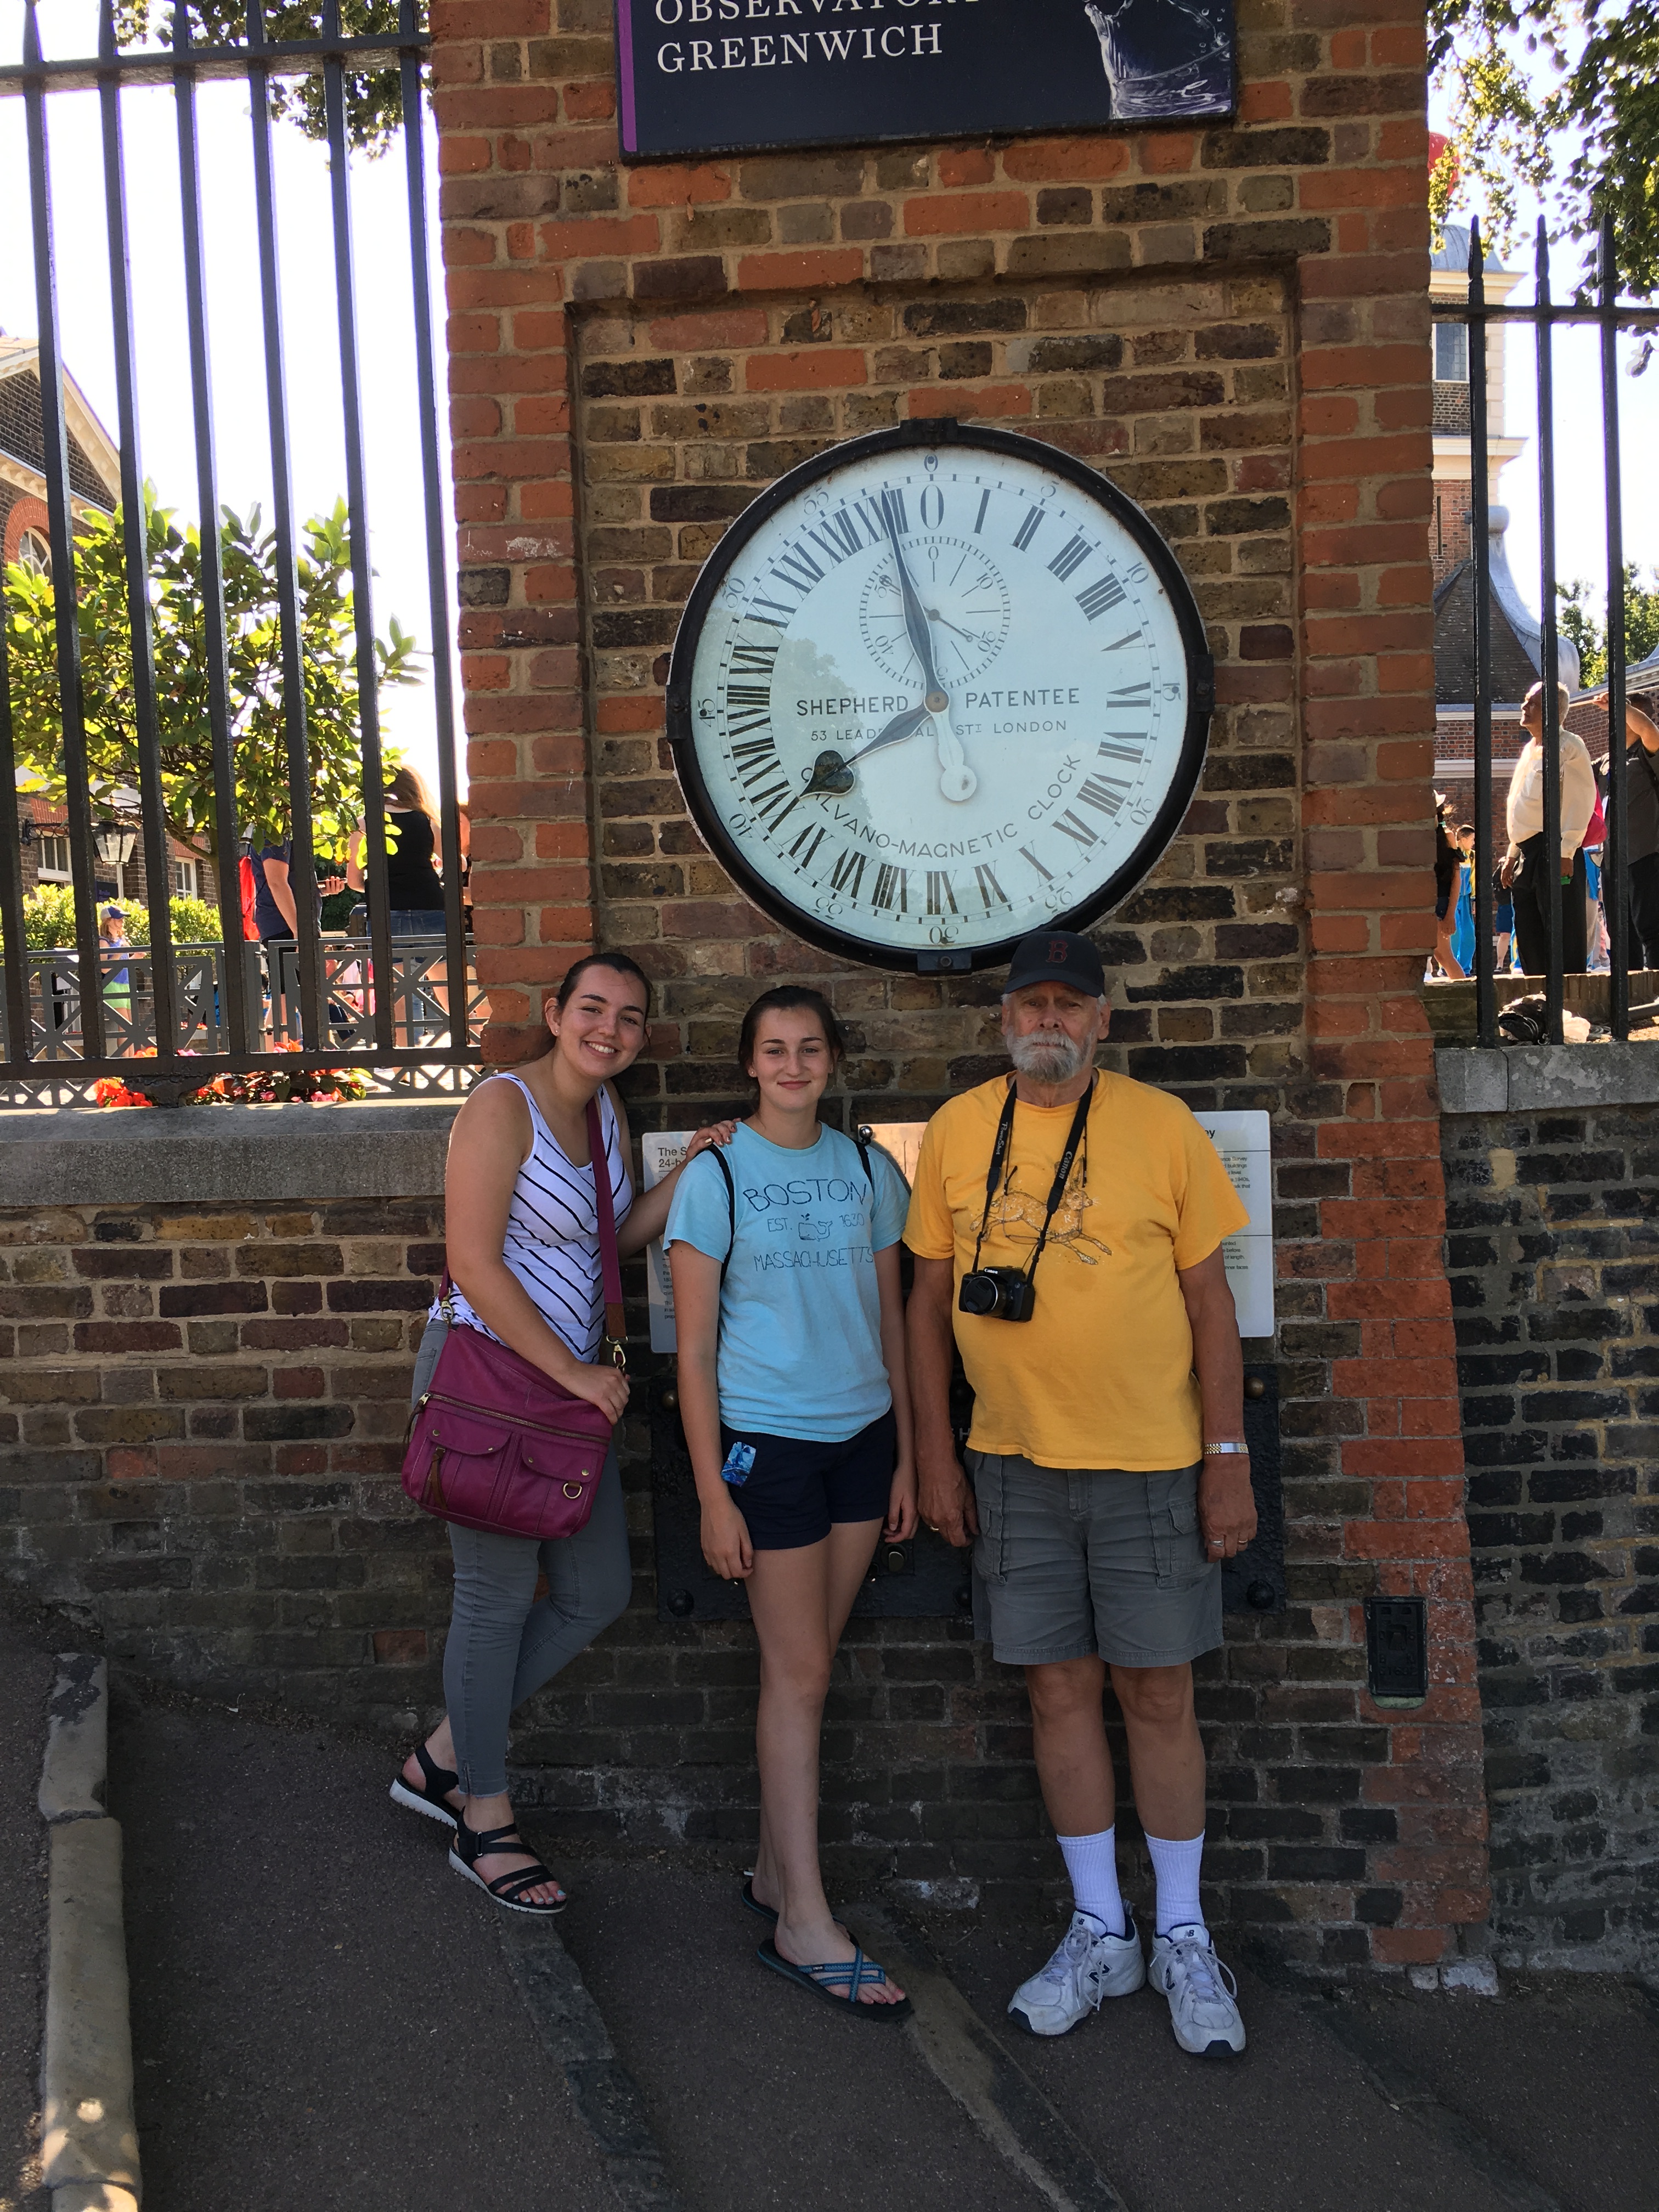 7:3 Greenwich mean time